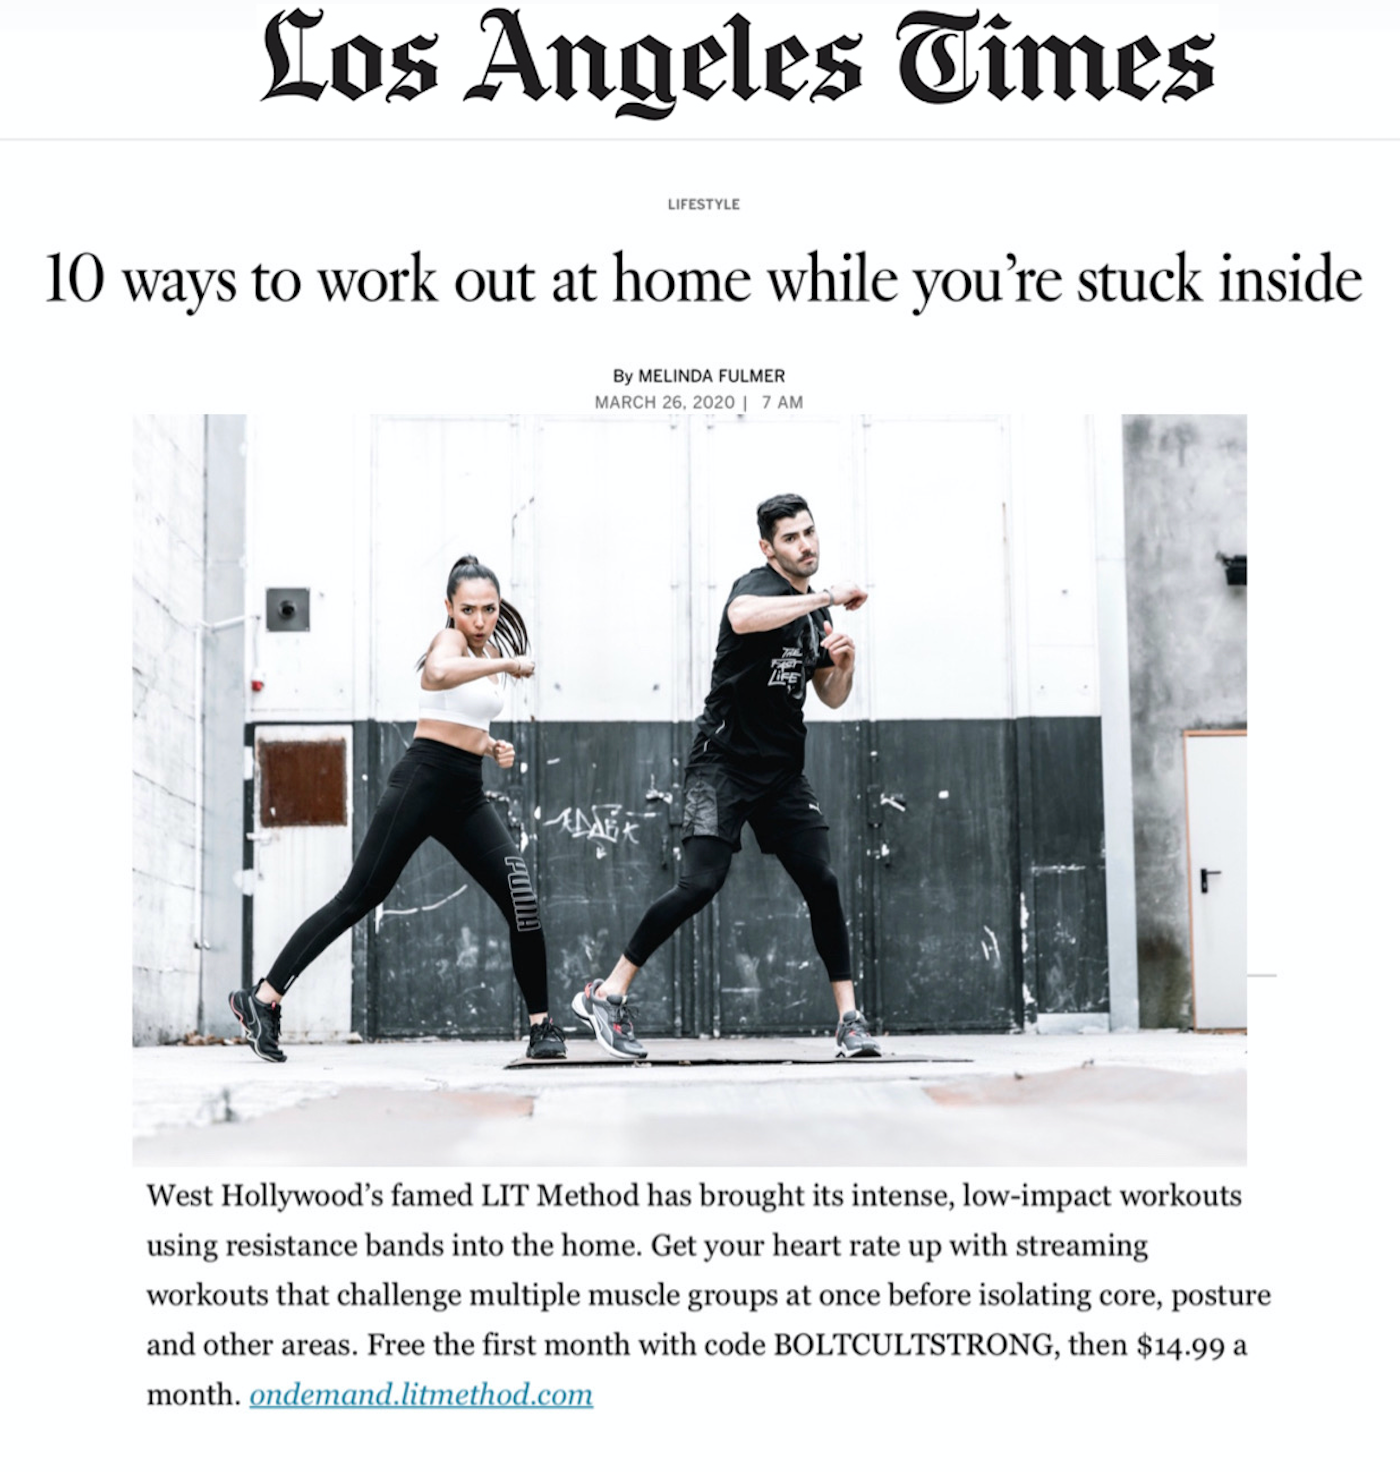 LIT Method featured in Los Angeles Times